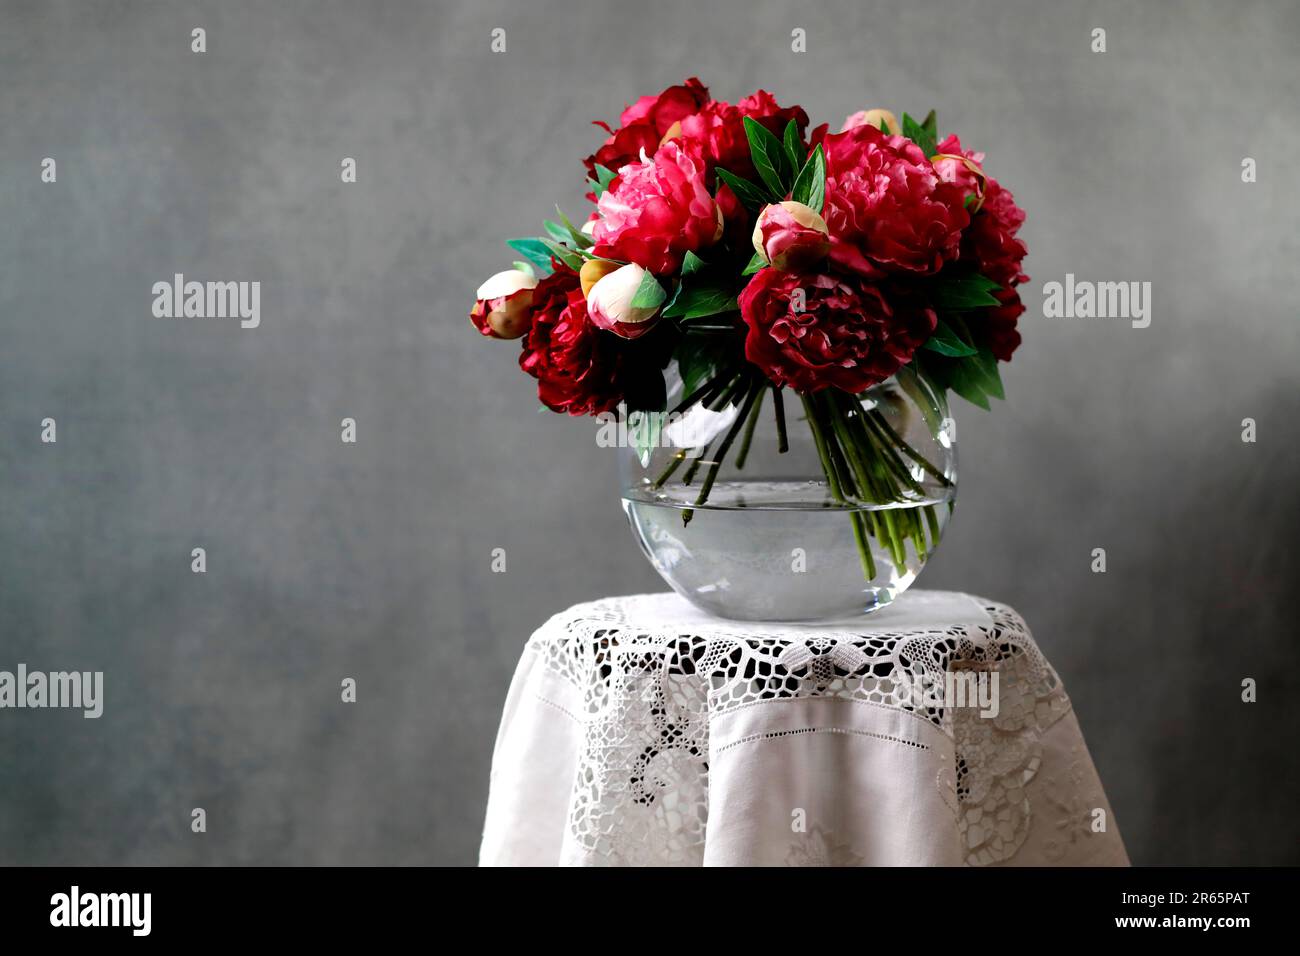 Still Life with Peonies in a glass vase Stock Photo